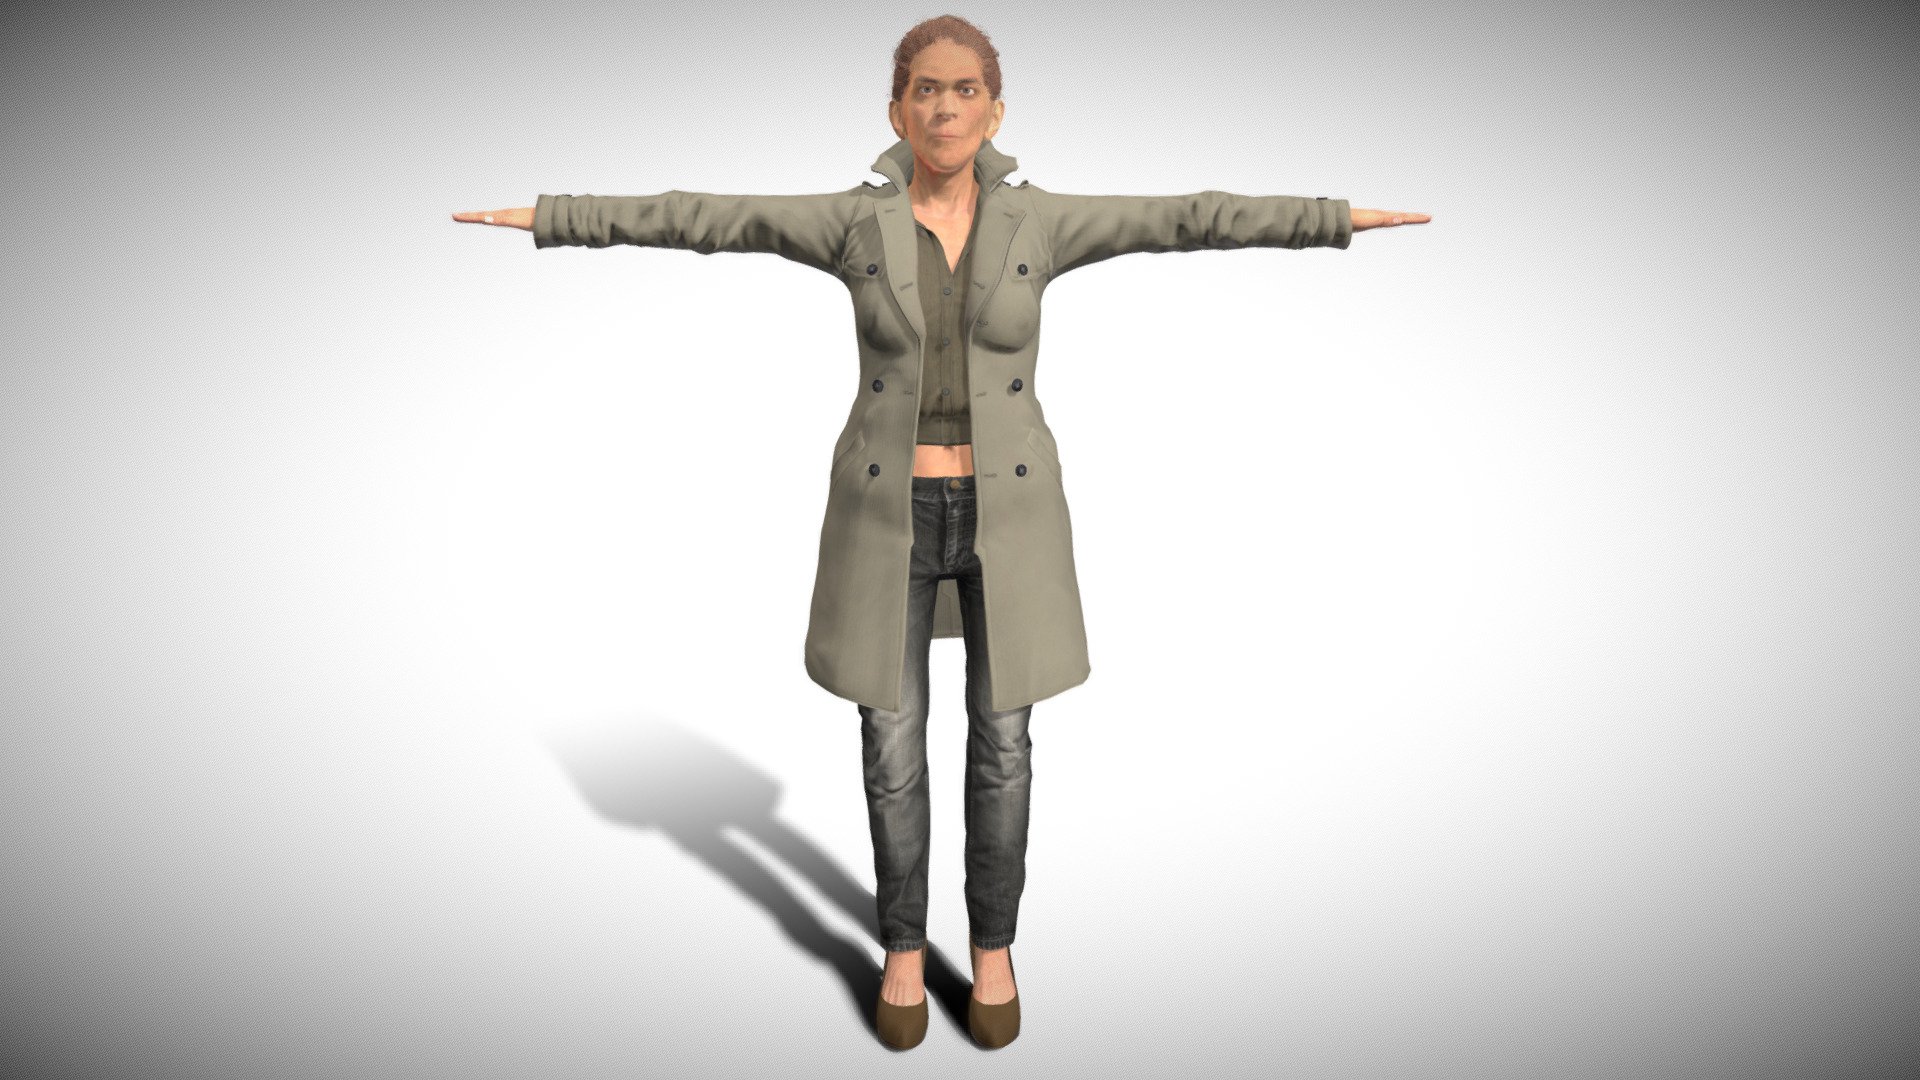 Character - Detective mature woman

Short story:

Sarah Williams is a brave and dedicated police chief in the city of New York. Sarah has spent years fighting crime on the streets of the Big Apple, and now she faces her greatest challenge: a gang of dangerous criminals who have been wreaking havoc in the city.

Product description:




T-pose

Game ready

low poly

Rigged character

Facial Blendshapes

Full Clothed

Realistic hair

FBX embedded textures

www.luciddreamsvisuals.com.ar - Detective mature woman - Buy Royalty Free 3D model by Lucid Dreams (@vjluciddreams) 3d model